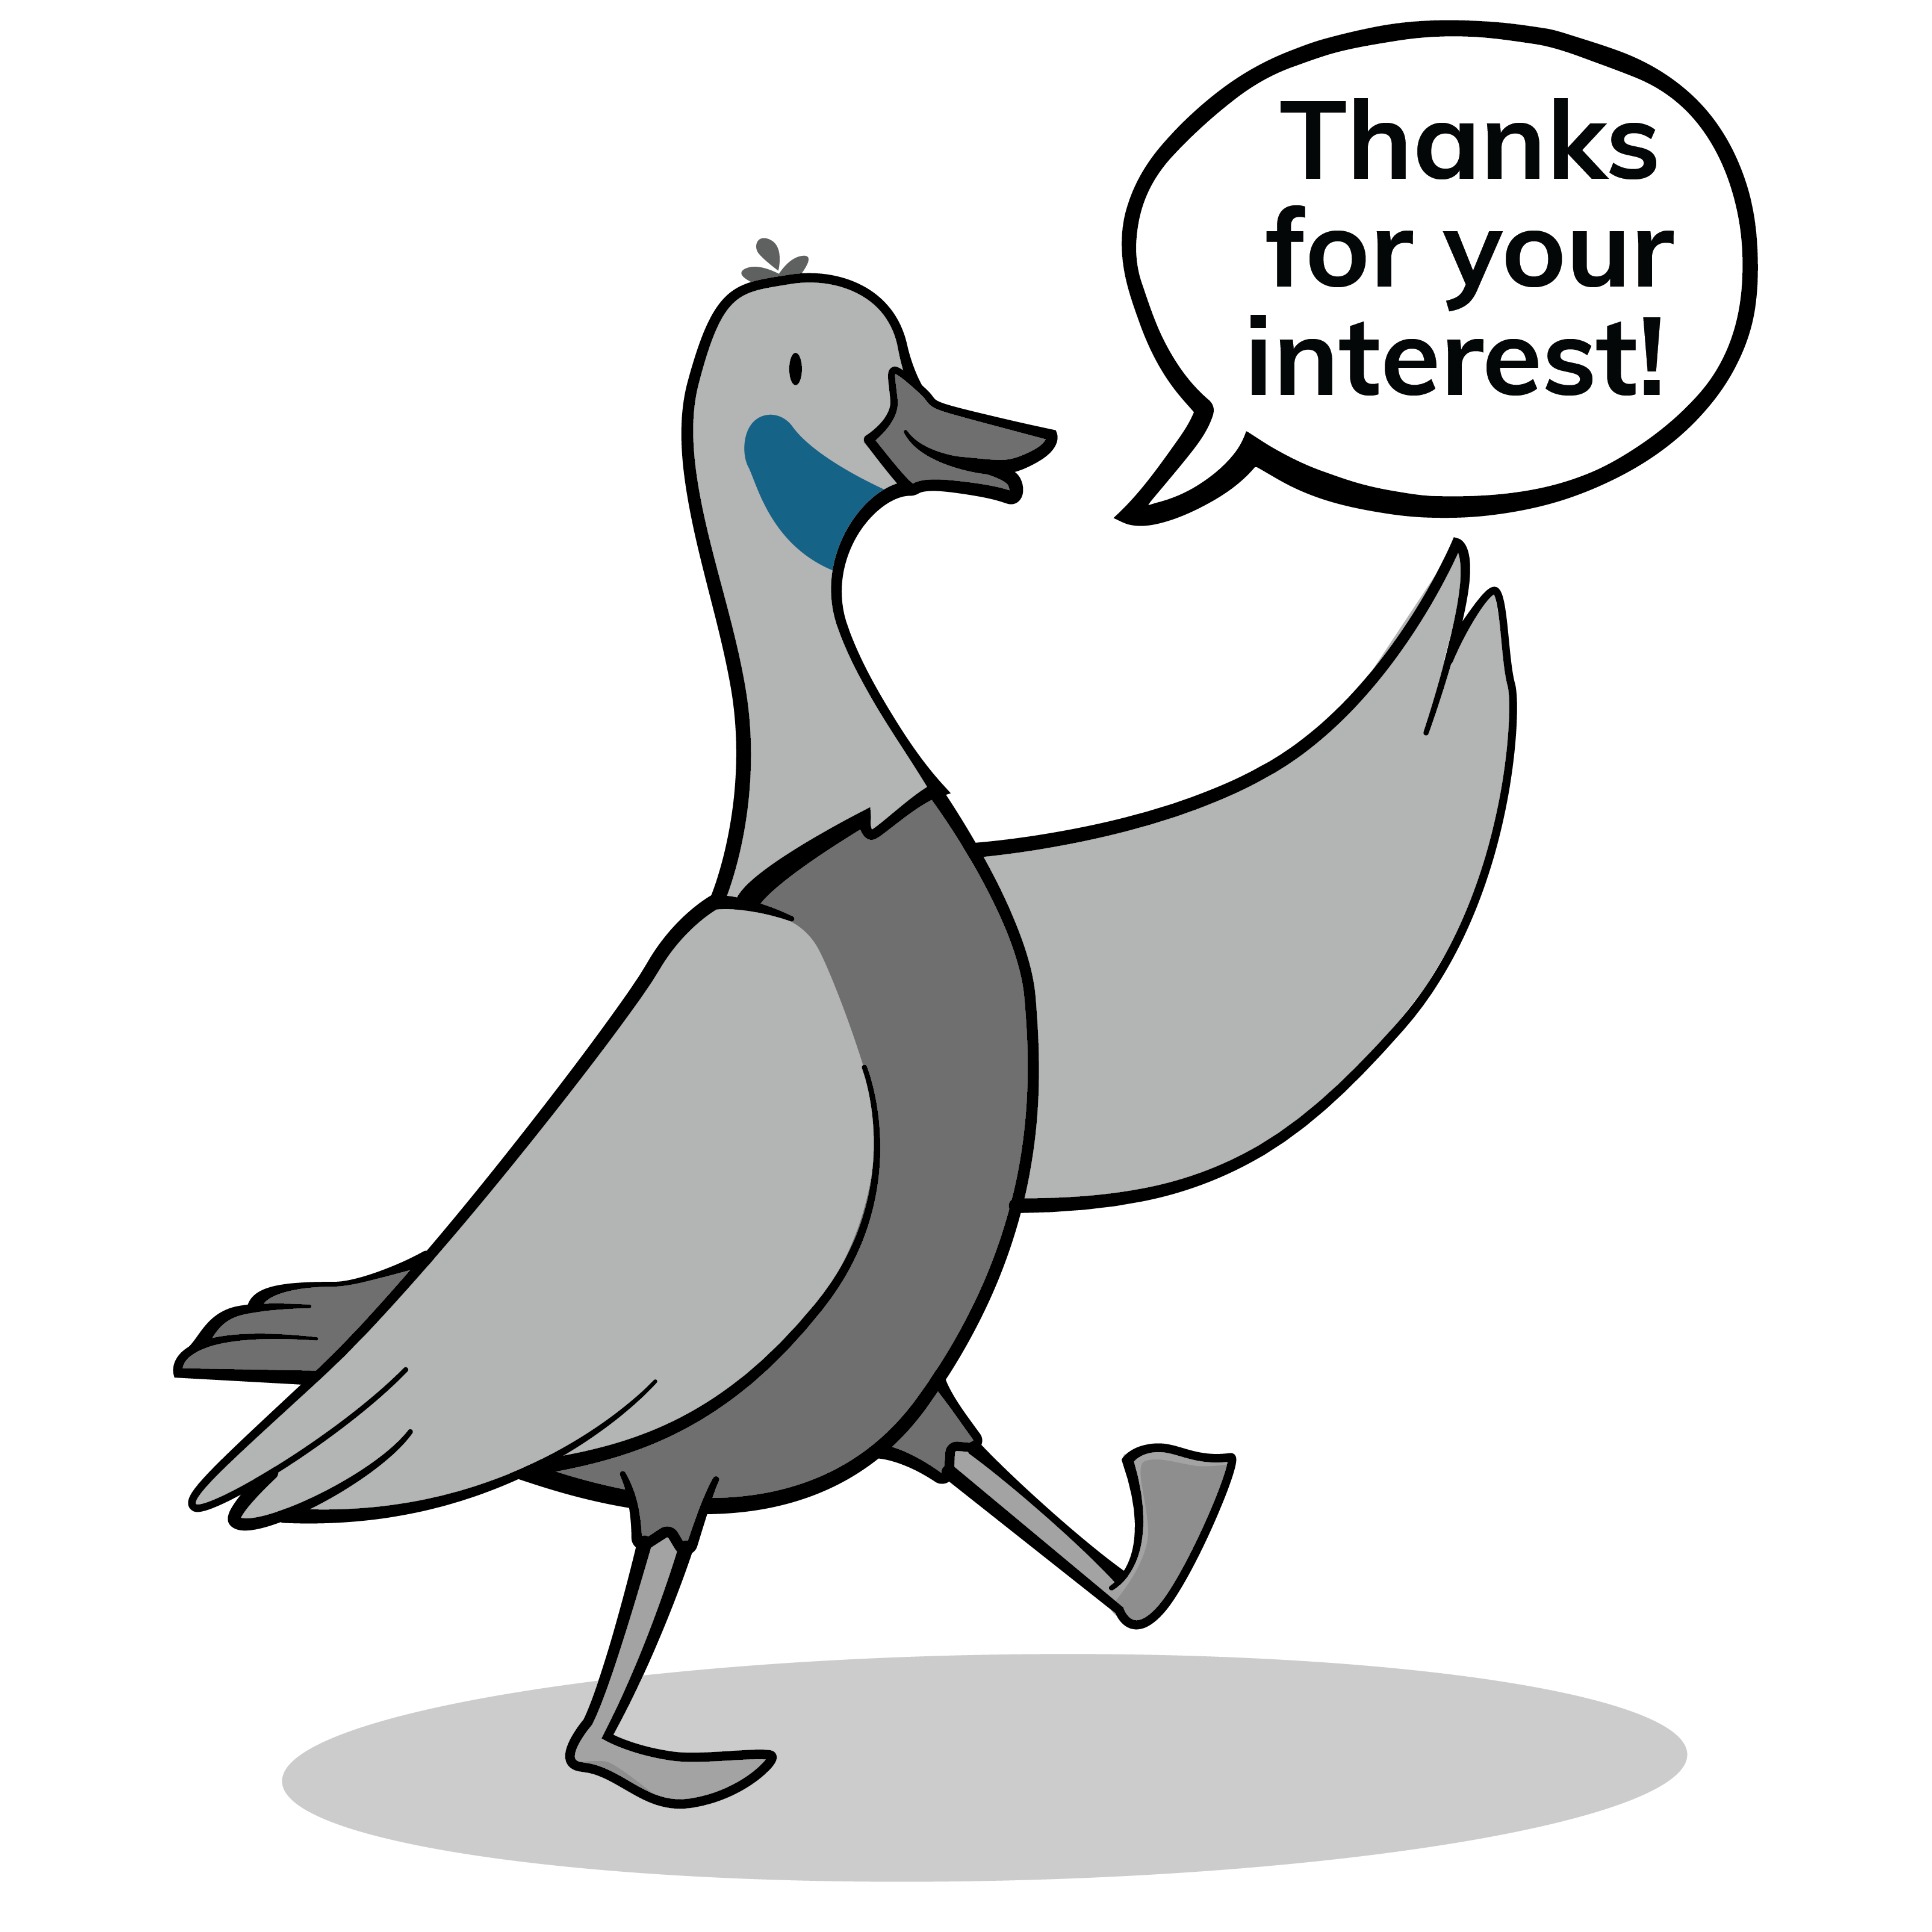 Goose holding a thumbs up icon with speech bubble saying 